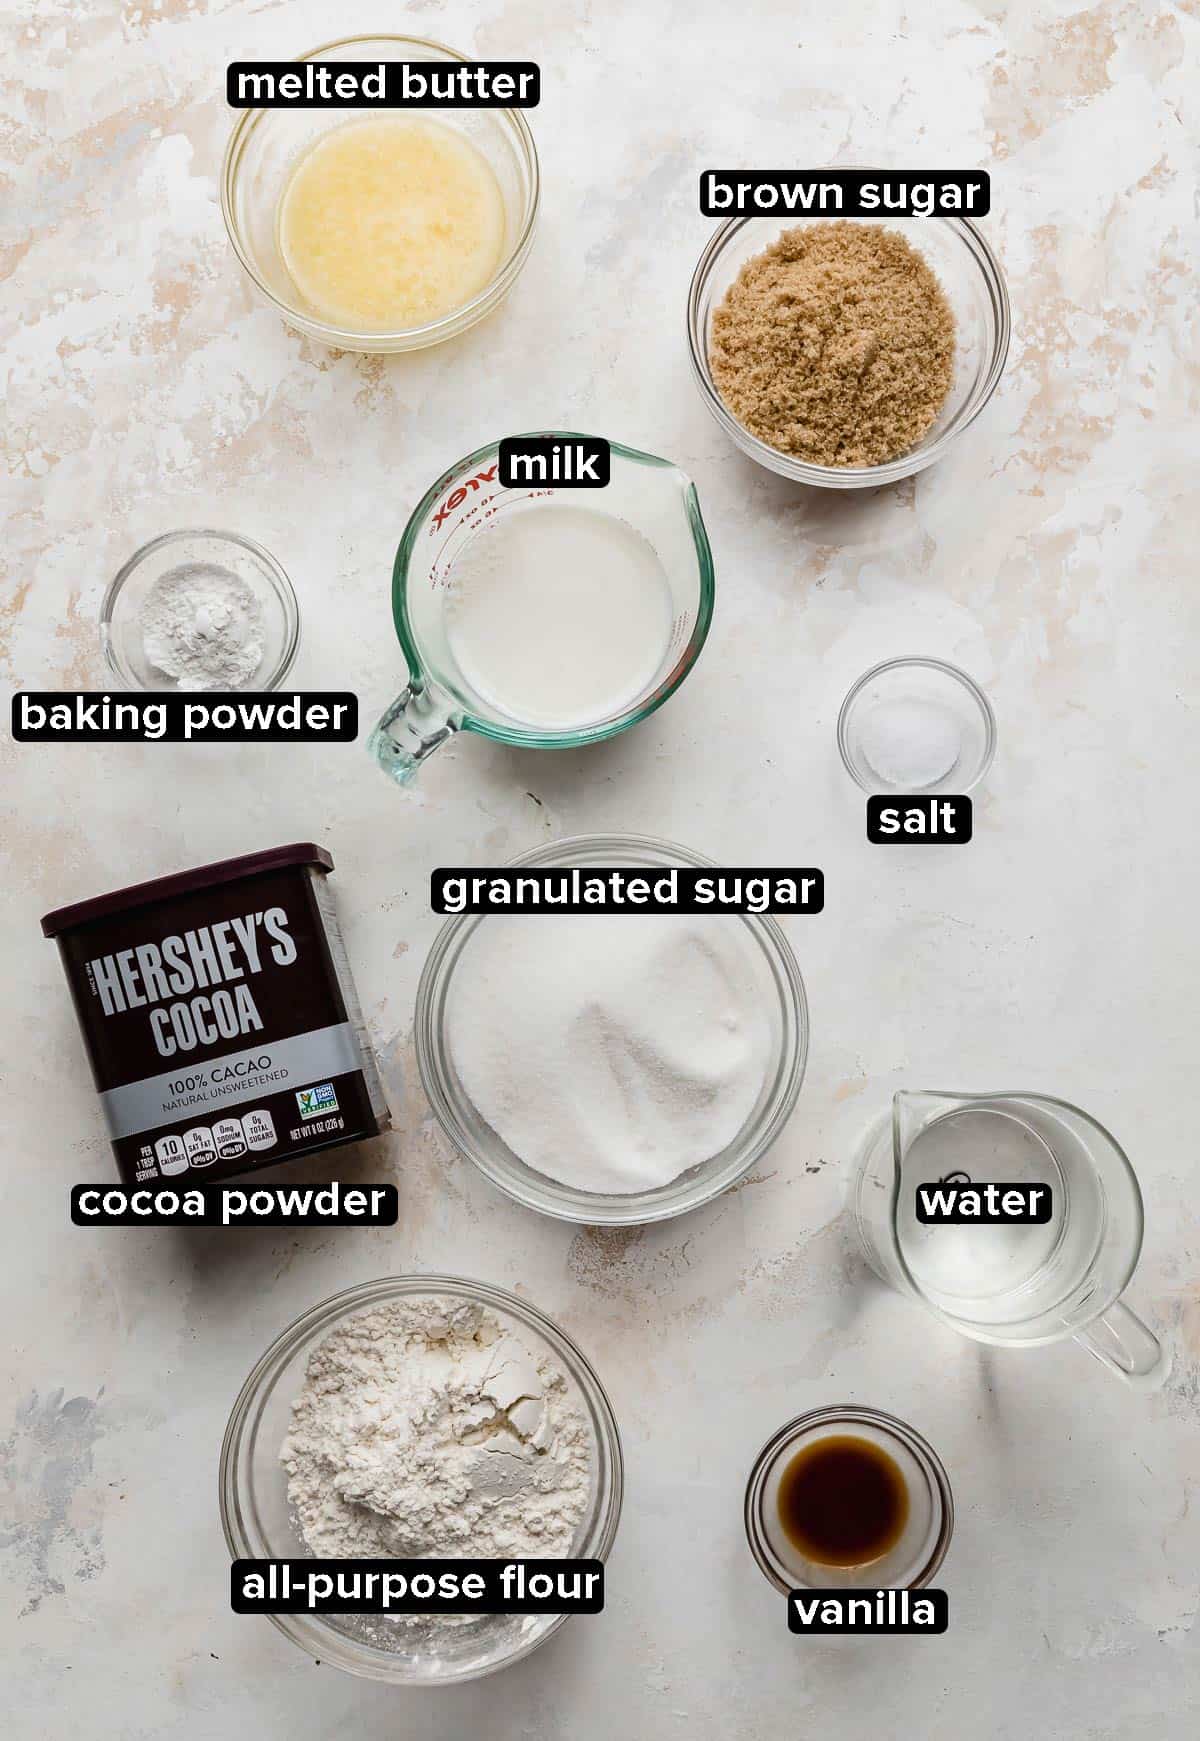 Ingredients used to make Hot Fudge Cake portioned into glass bowls on a white and cream textured background.